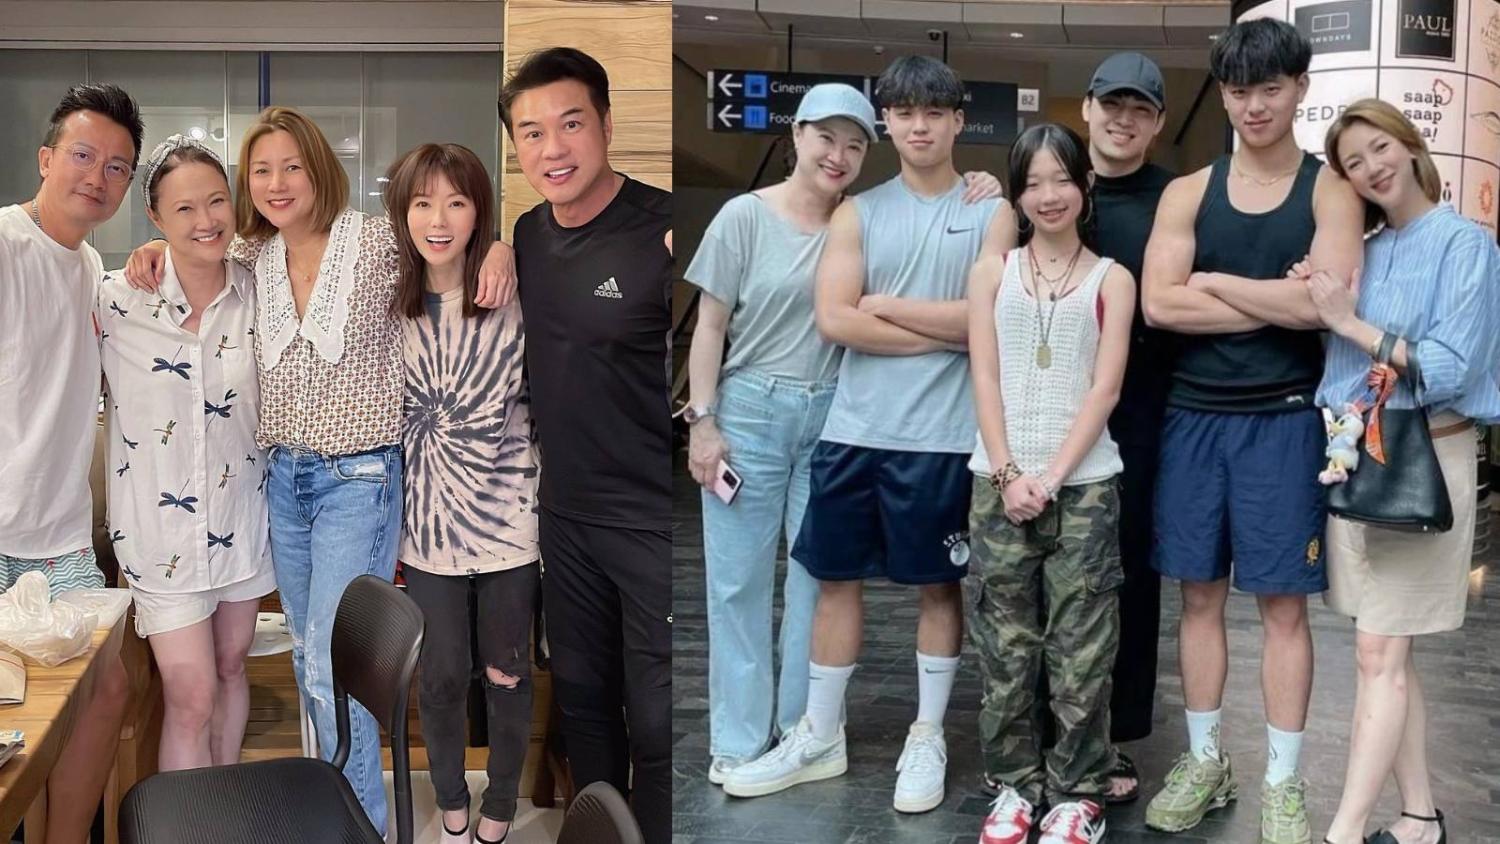 Ex Actress Ivy Lee & Her Family Were In Singapore For A Short Trip; And She  Managed To Surprise Her Showbiz Pals - 8days